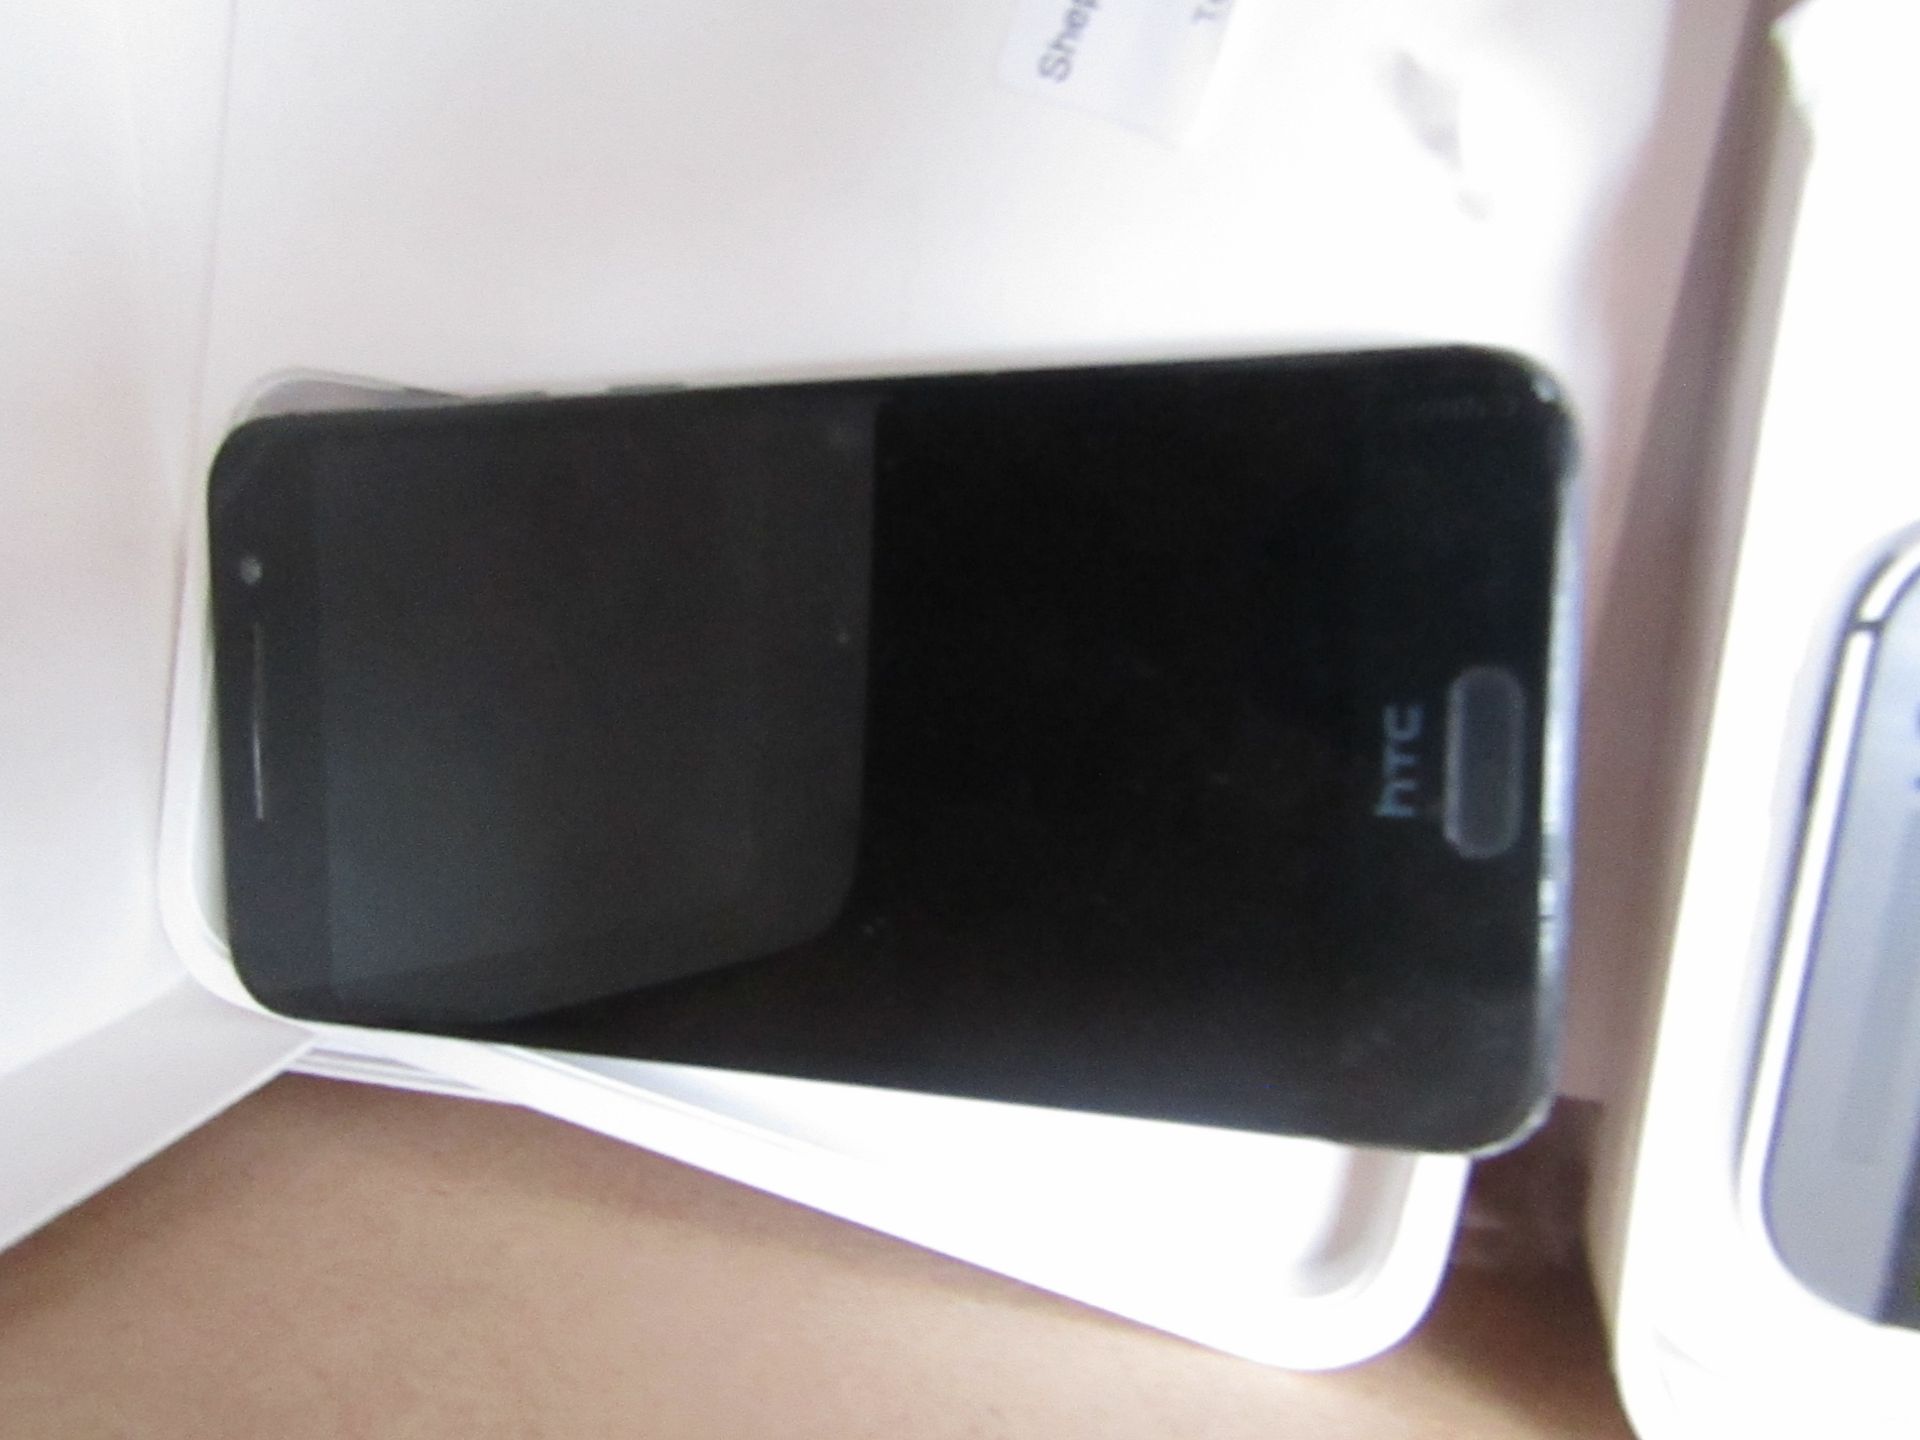 HTC One (M8) CDMA phone, no power. Boxed. Estimated specs at https://www.gsmarena.com/htc_one_(m8)